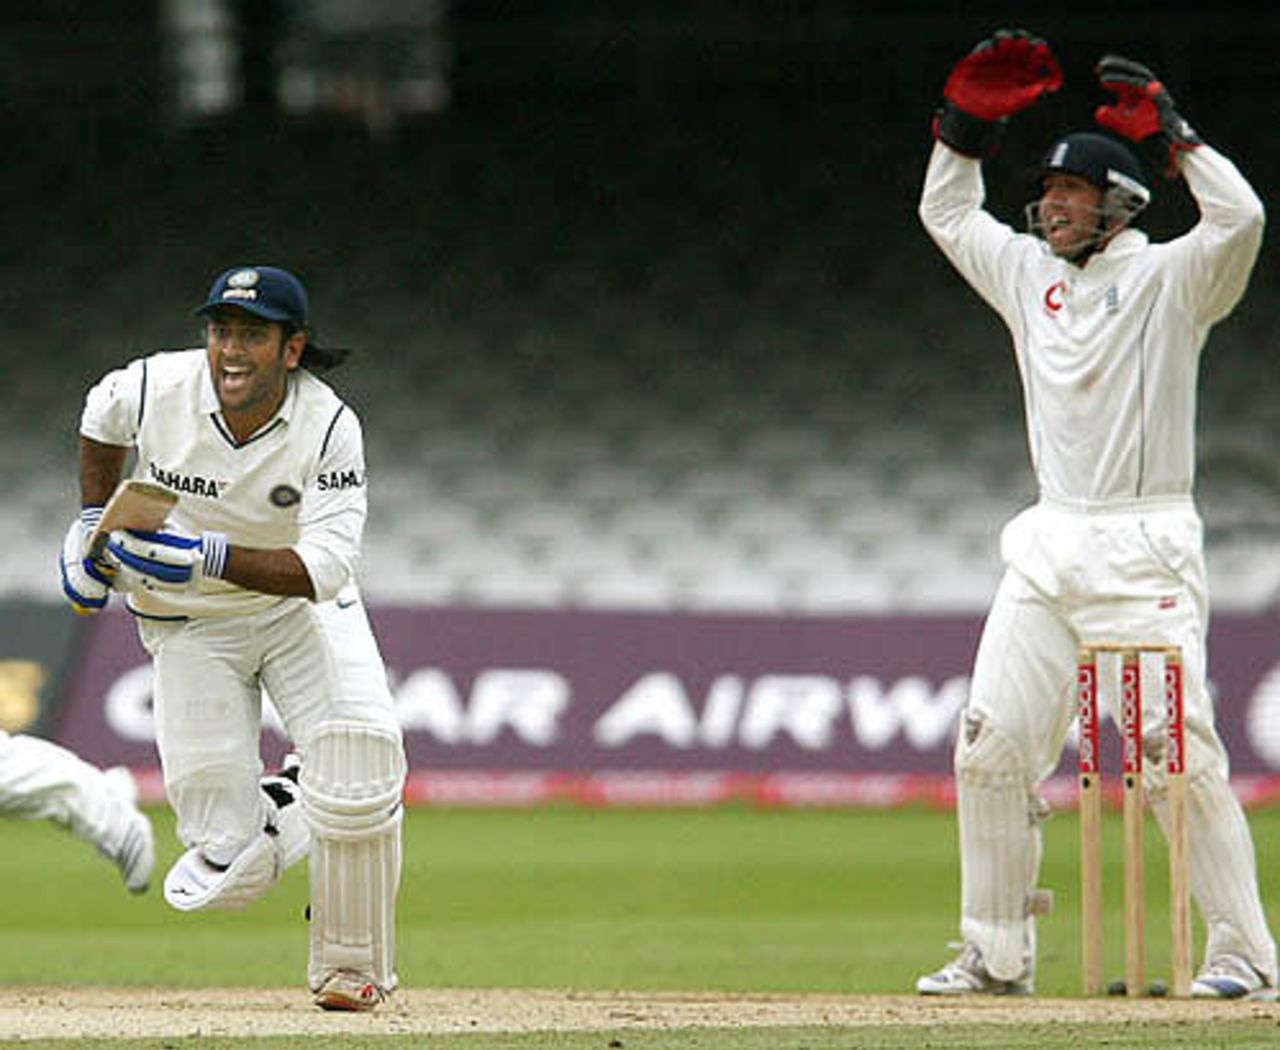 Mahendra Singh Dhoni urges the nonstriker to pick up a quick single while Matt Prior looks on, England v India, 1st Test, Lord's, 5th day, July 23, 2007 

